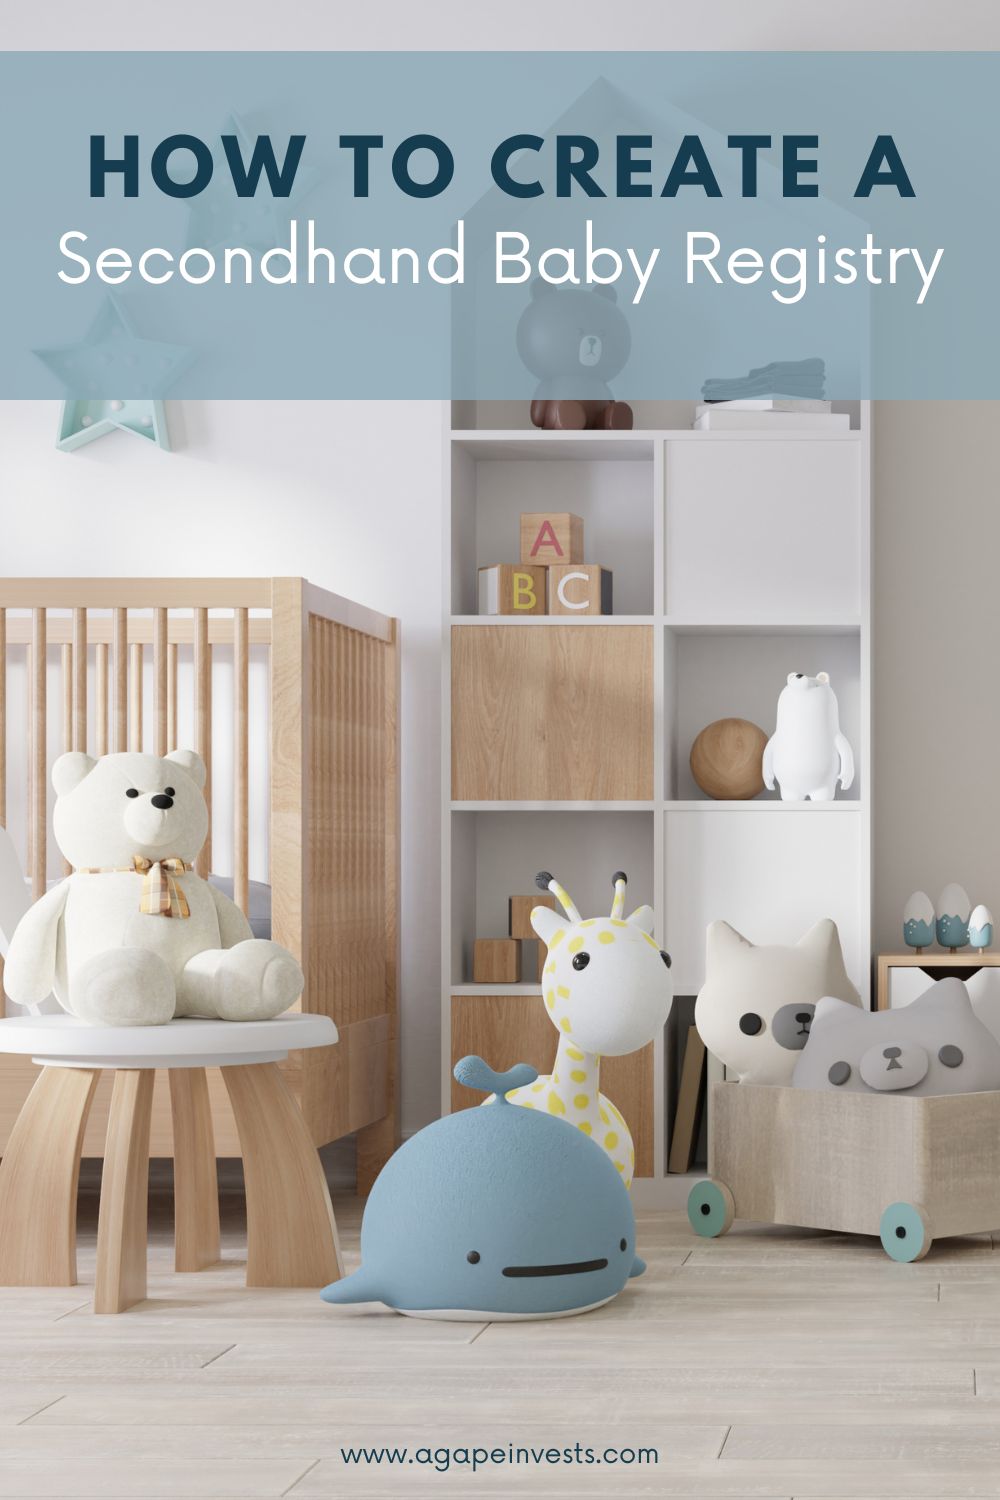 Save your friends' money, create a secondhand baby registry. How to save money with a secondhand baby registry. How to make a hand-me-down baby registry. Baby registry alternatives. 